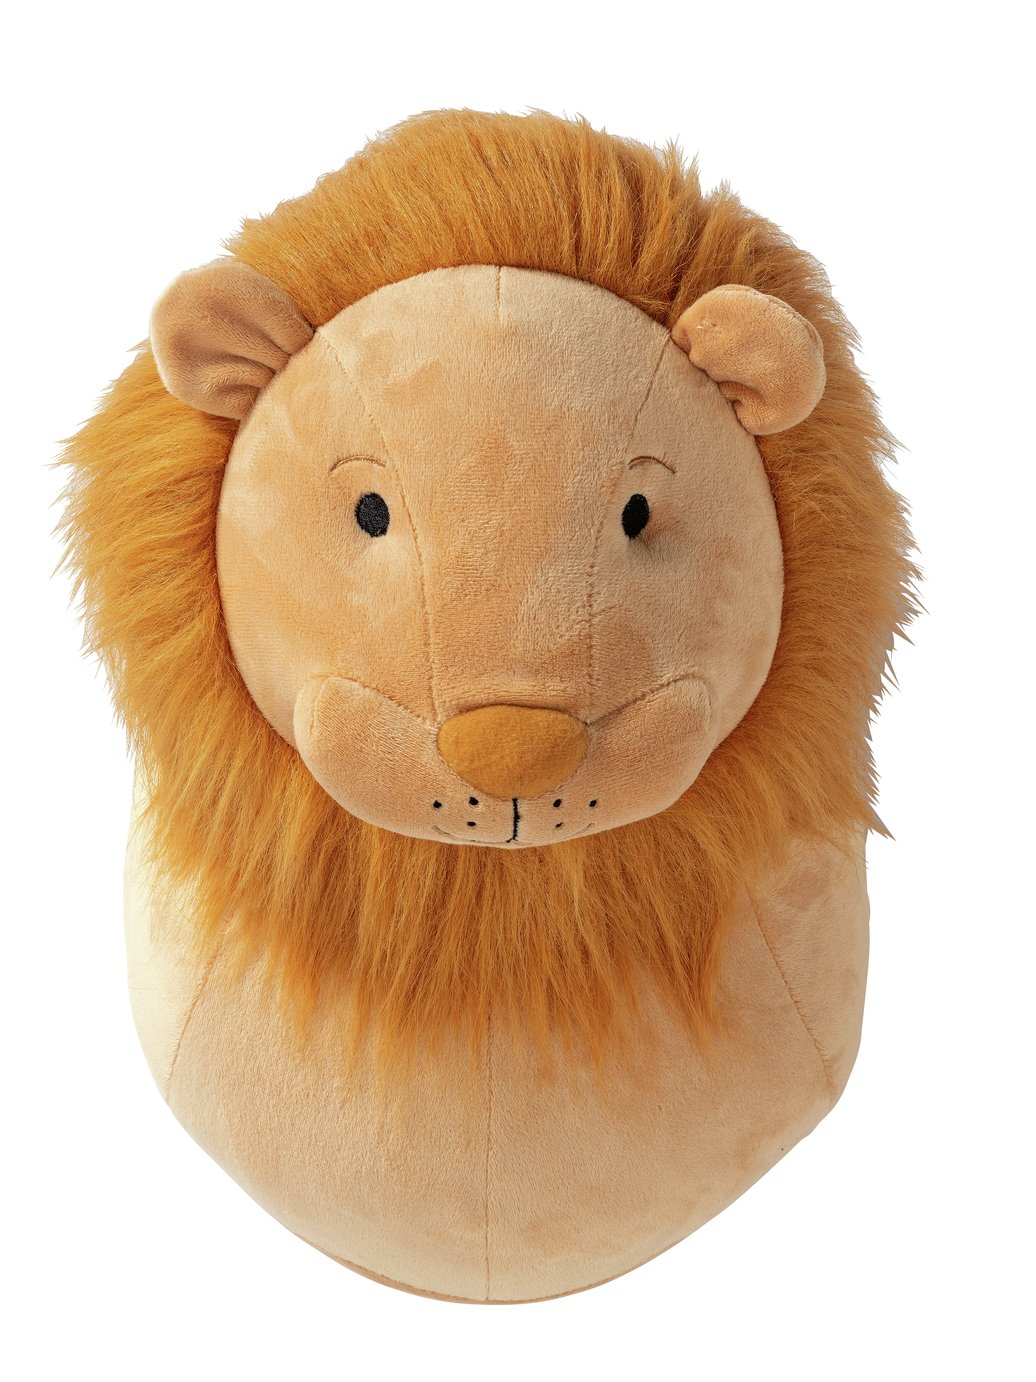 Roaring Lion Head Animated Wall Plaque